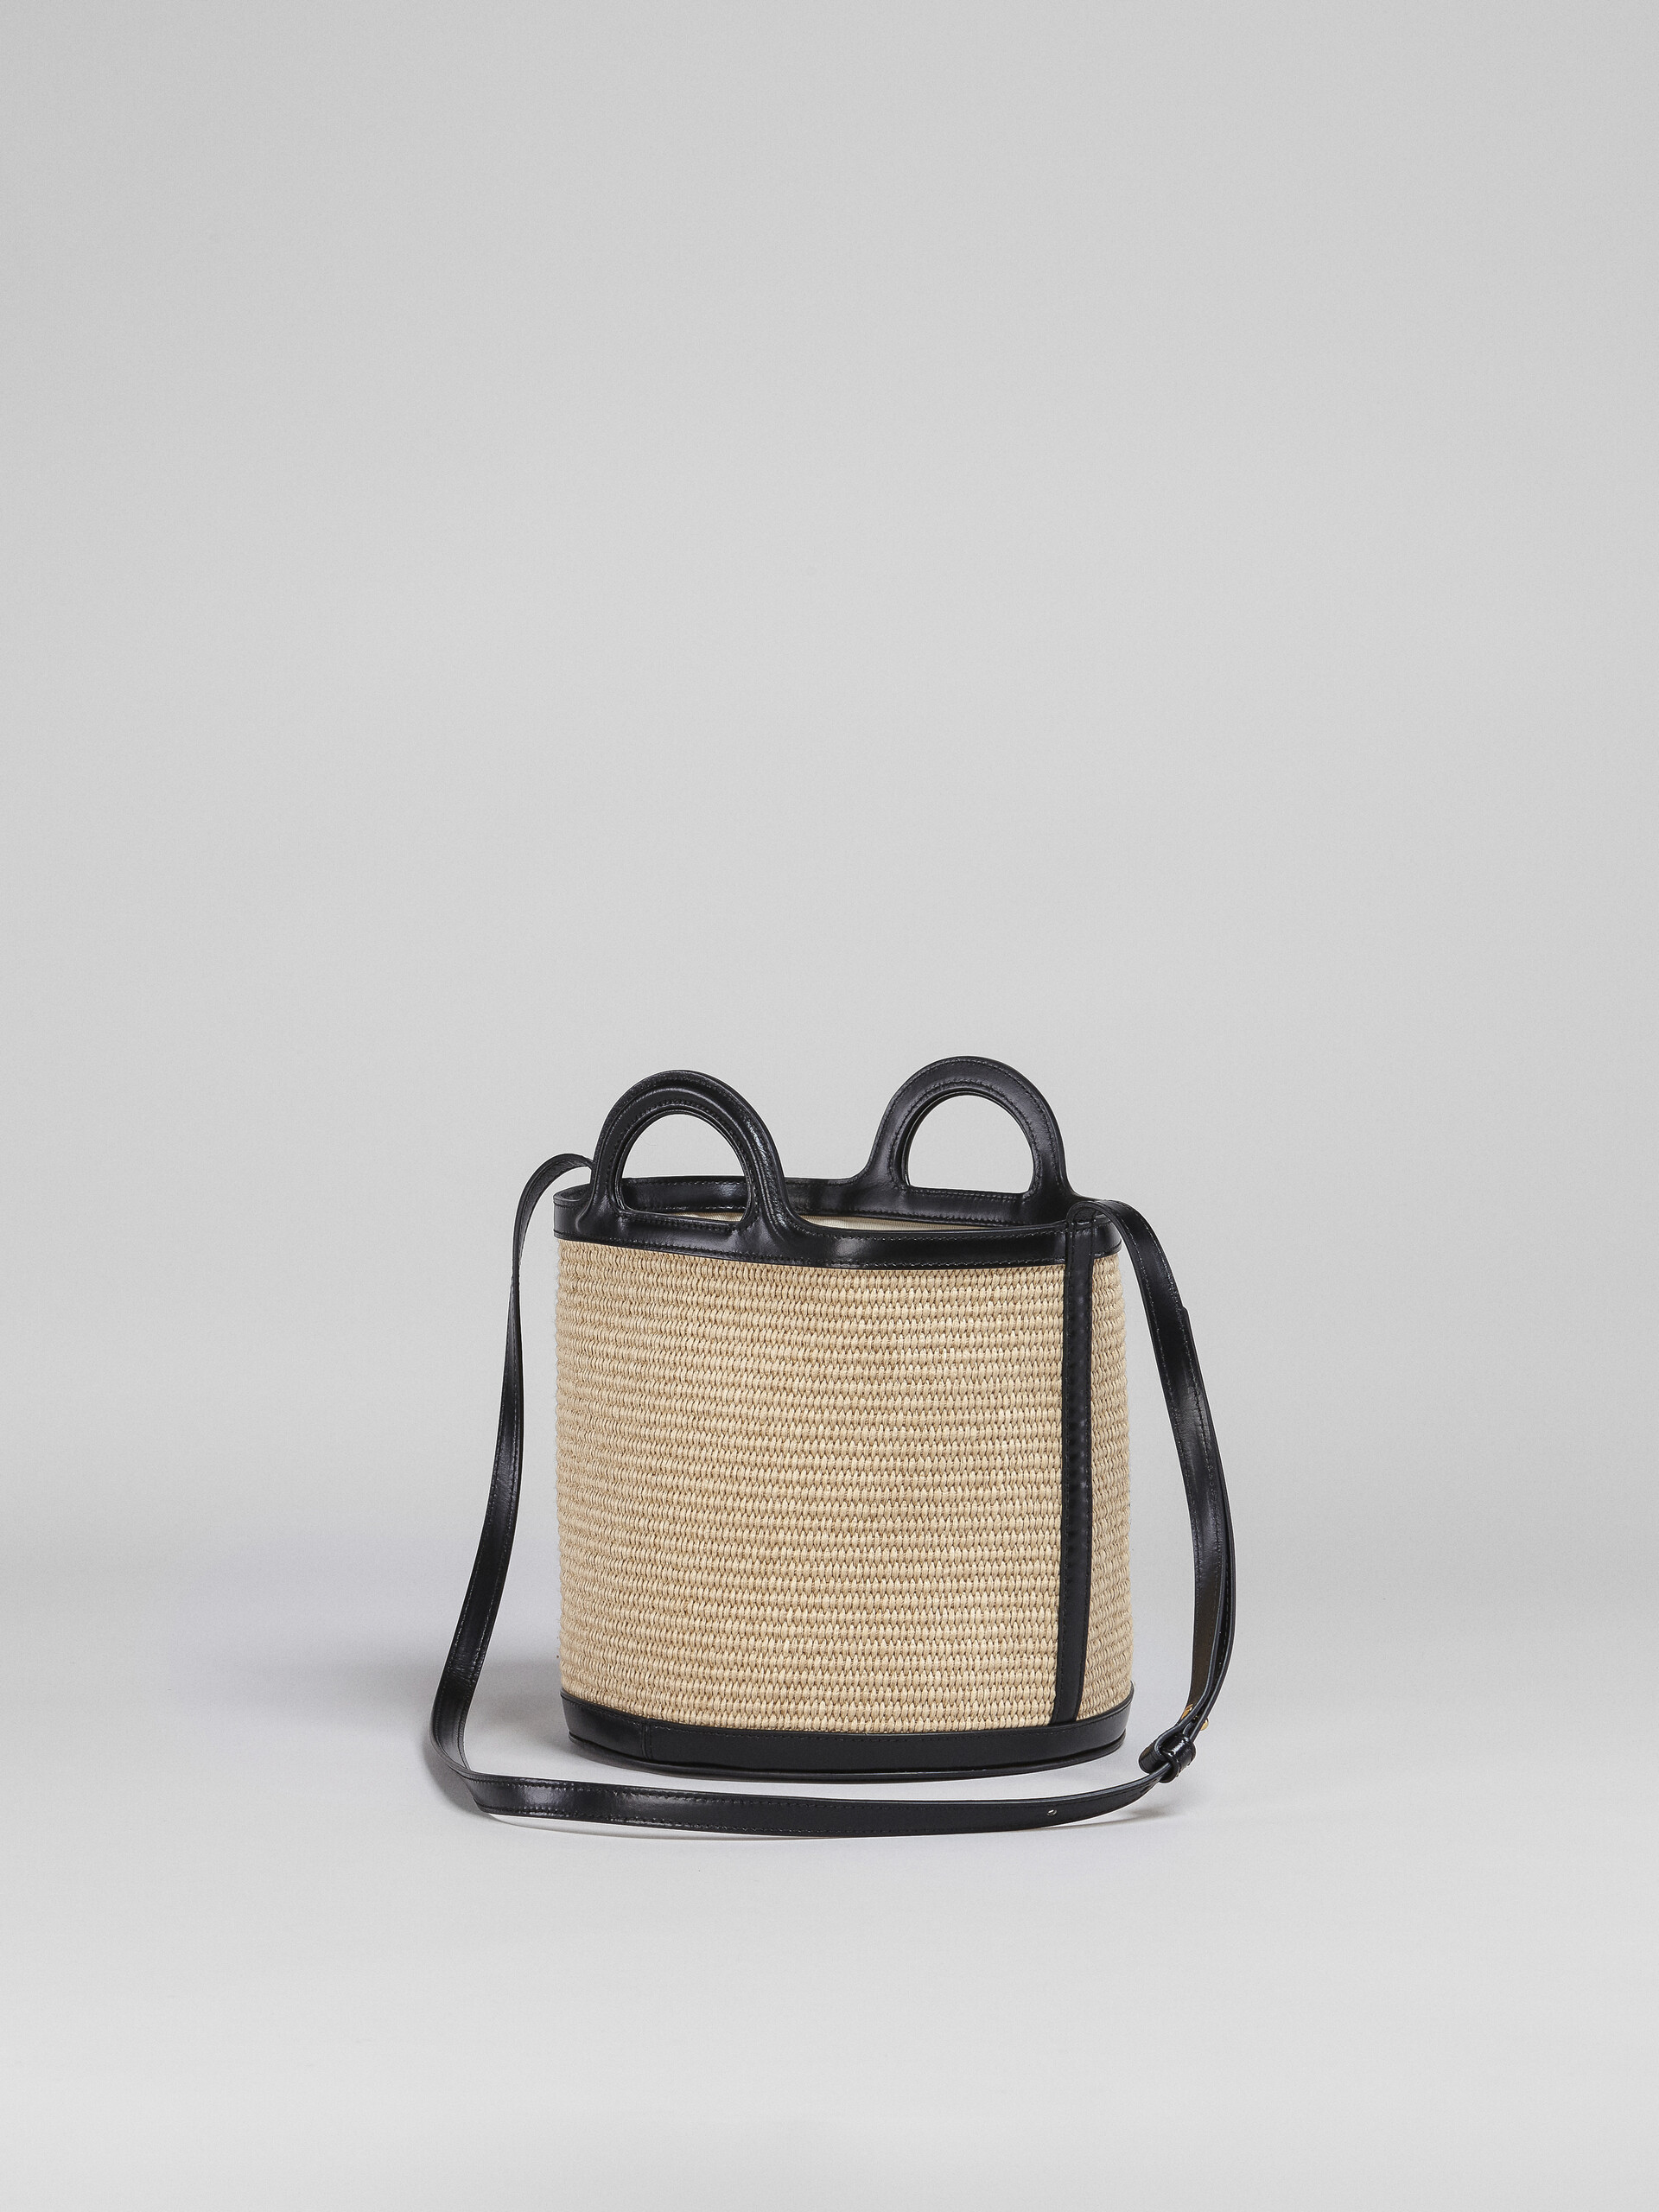 TROPICALIA small bucket bag  in black leather and raffia - Shoulder Bags - Image 3